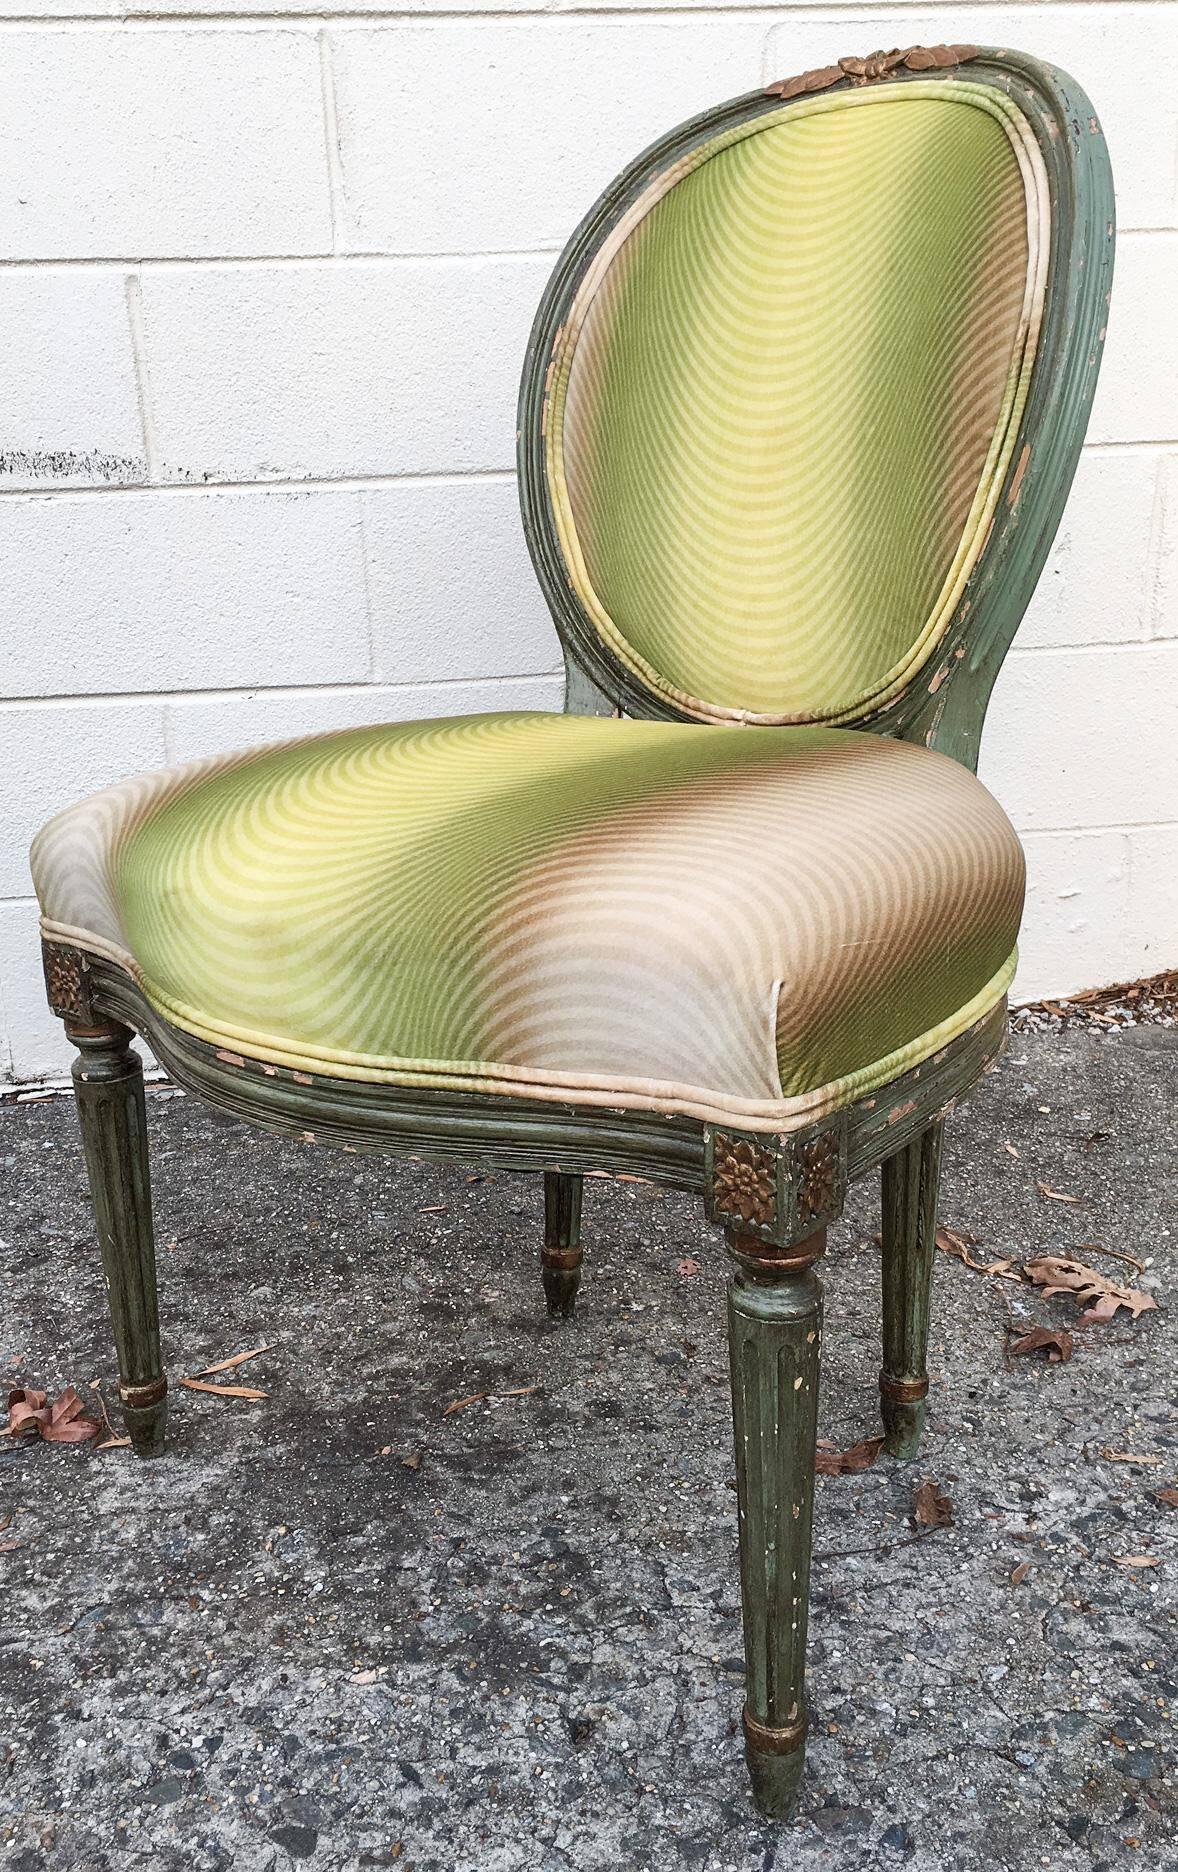 French Provincial 19th Century French Fauteuil Chair with Green Ombre Velvet by Vervain